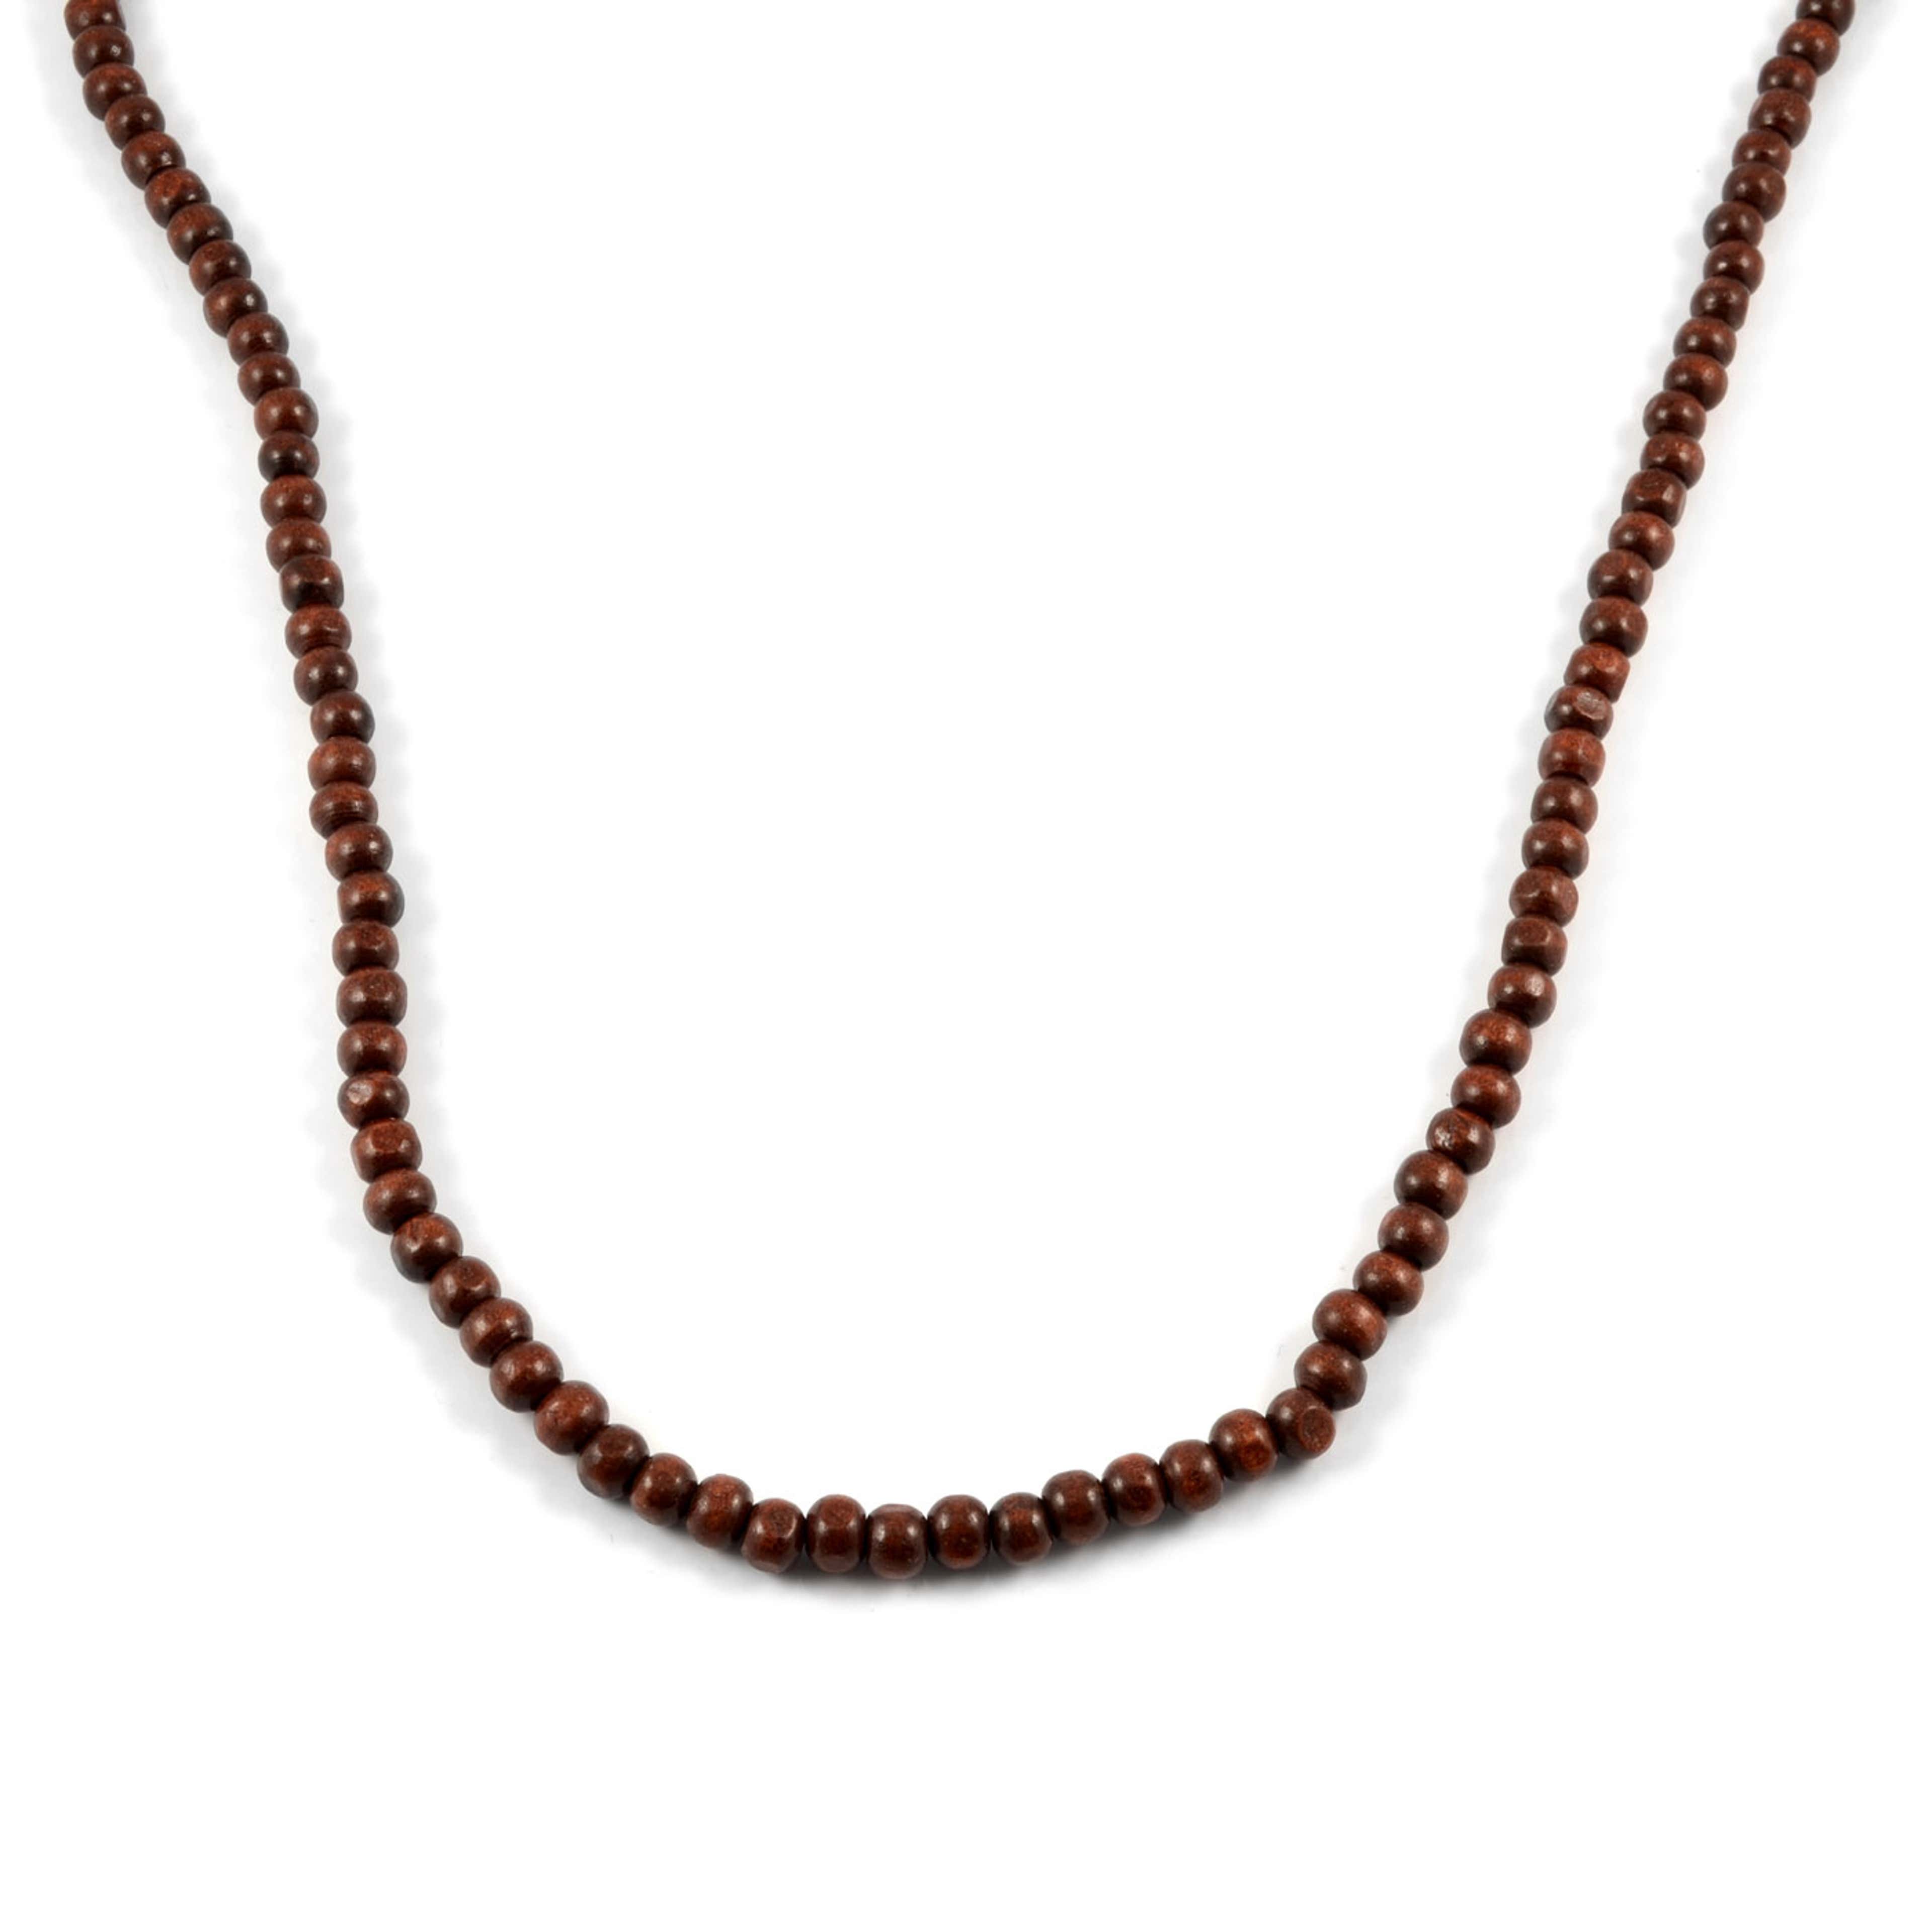  Brown Wooden Pearl Necklace